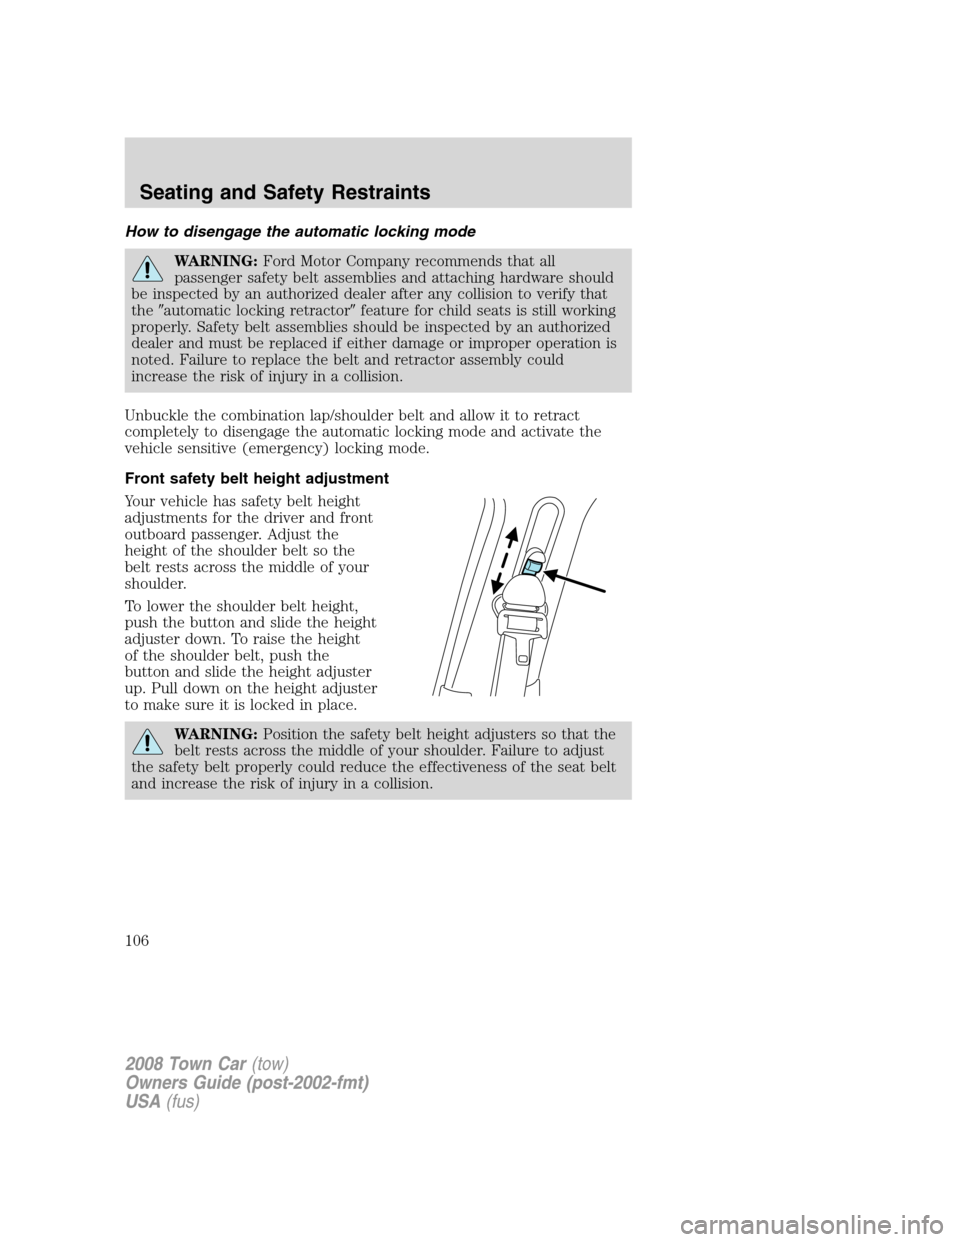 LINCOLN TOWN CAR 2008  Owners Manual How to disengage the automatic locking mode
WARNING:Ford Motor Company recommends that all
passenger safety belt assemblies and attaching hardware should
be inspected by an authorized dealer after any